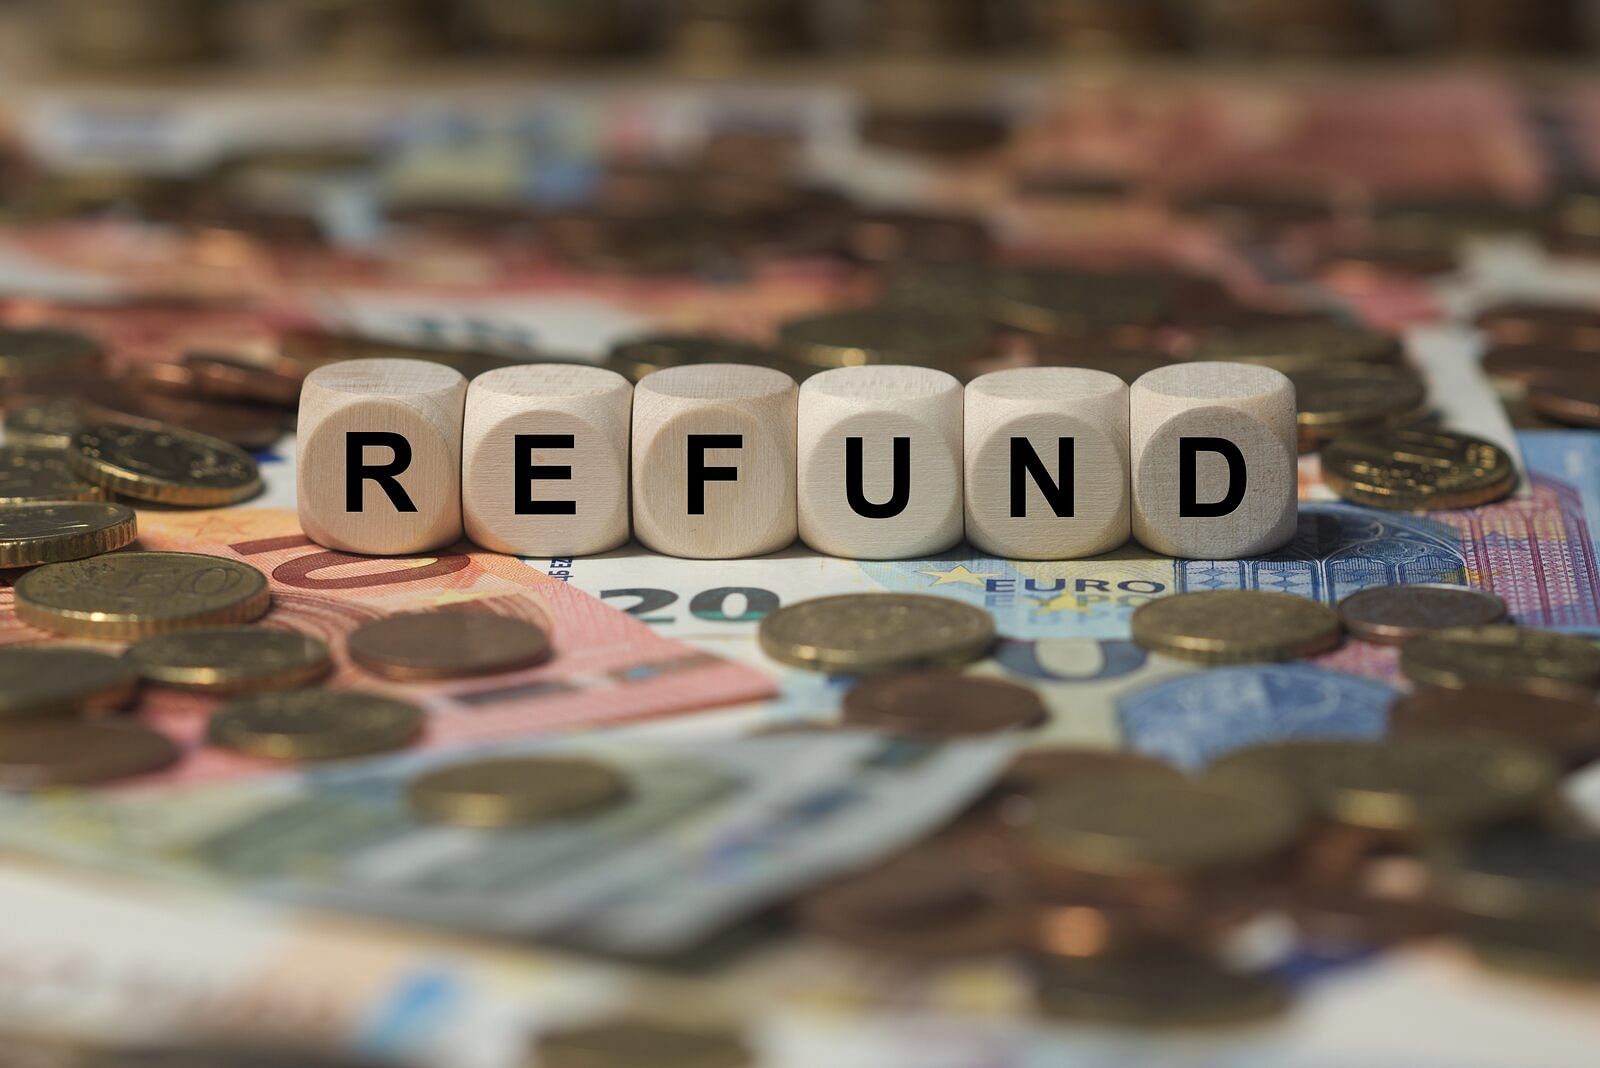 Wooden cubes on top of paper bills and scattered coins are lined up in a row, each letter printed on the cubes spells the word “refund”